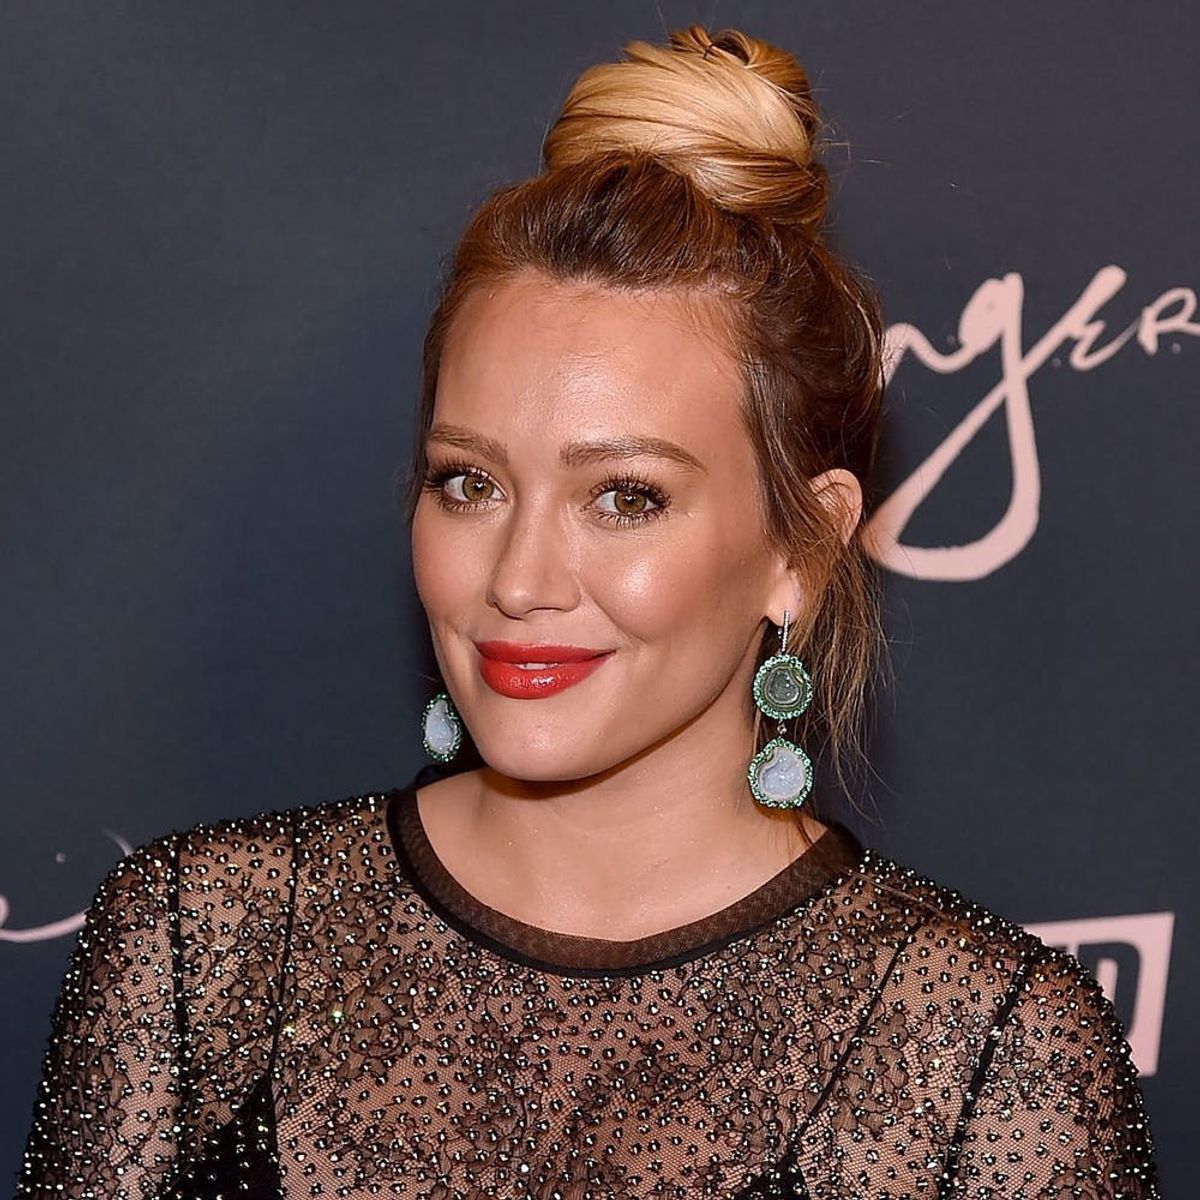 Hilary Duff’s Son Picked Out the Best Name for His Future Sister